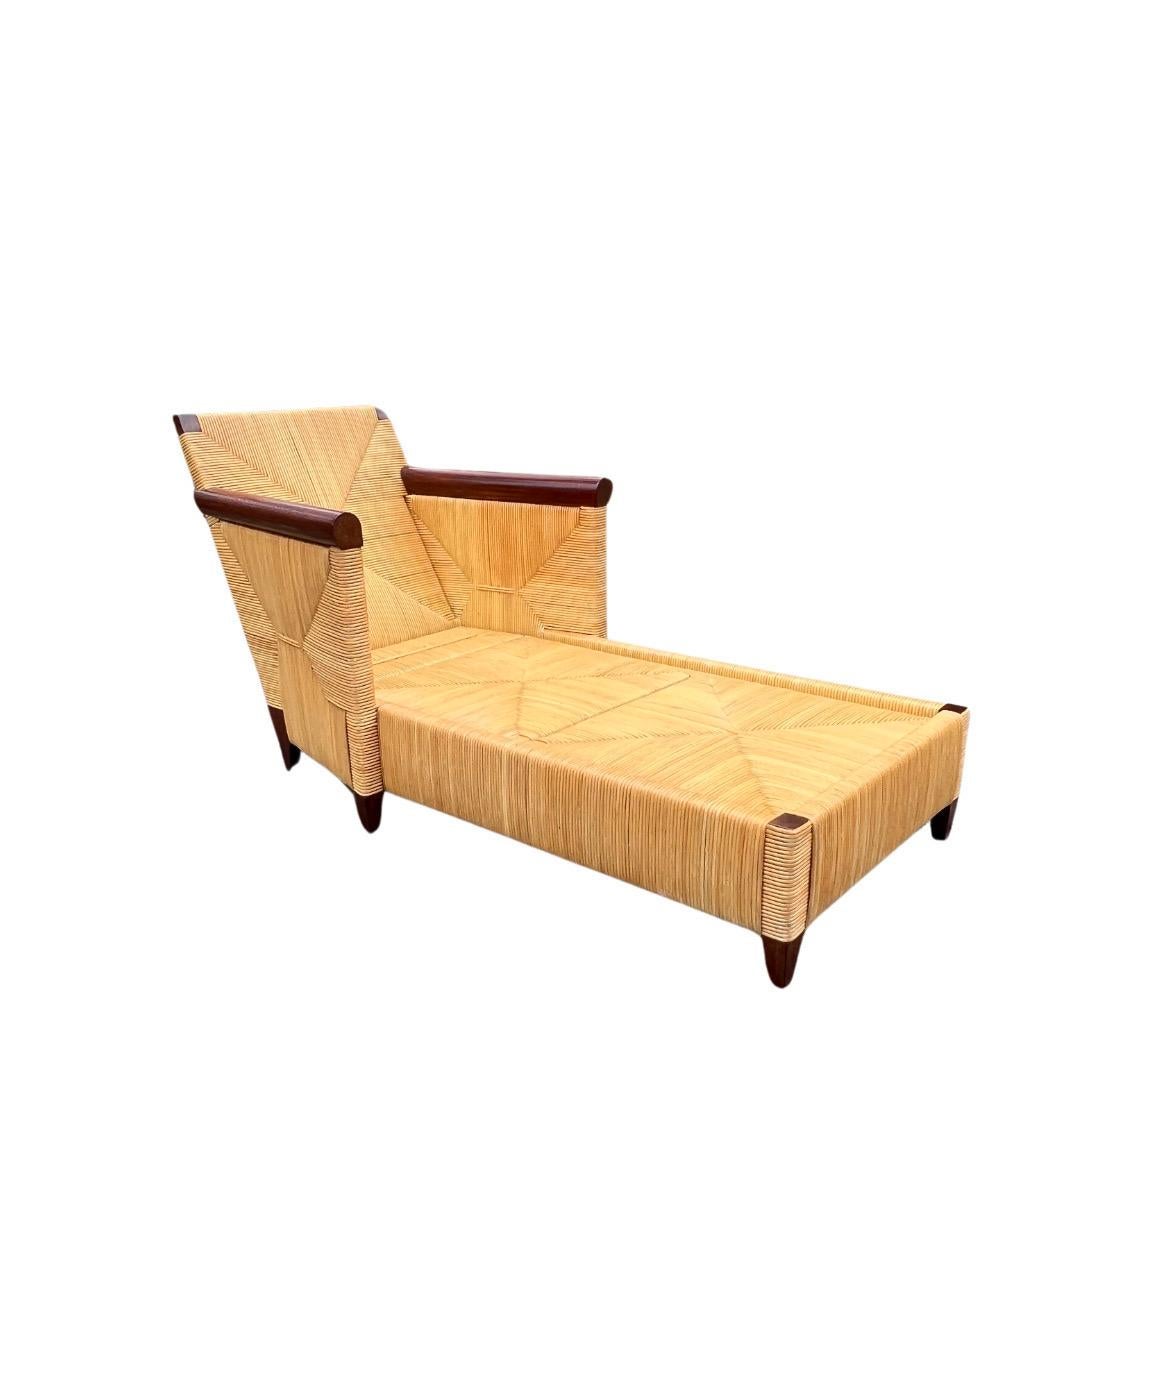 Sophisticated Restored Rush Cane Chaise Lounge by John Hutton for Donghia For Sale 13